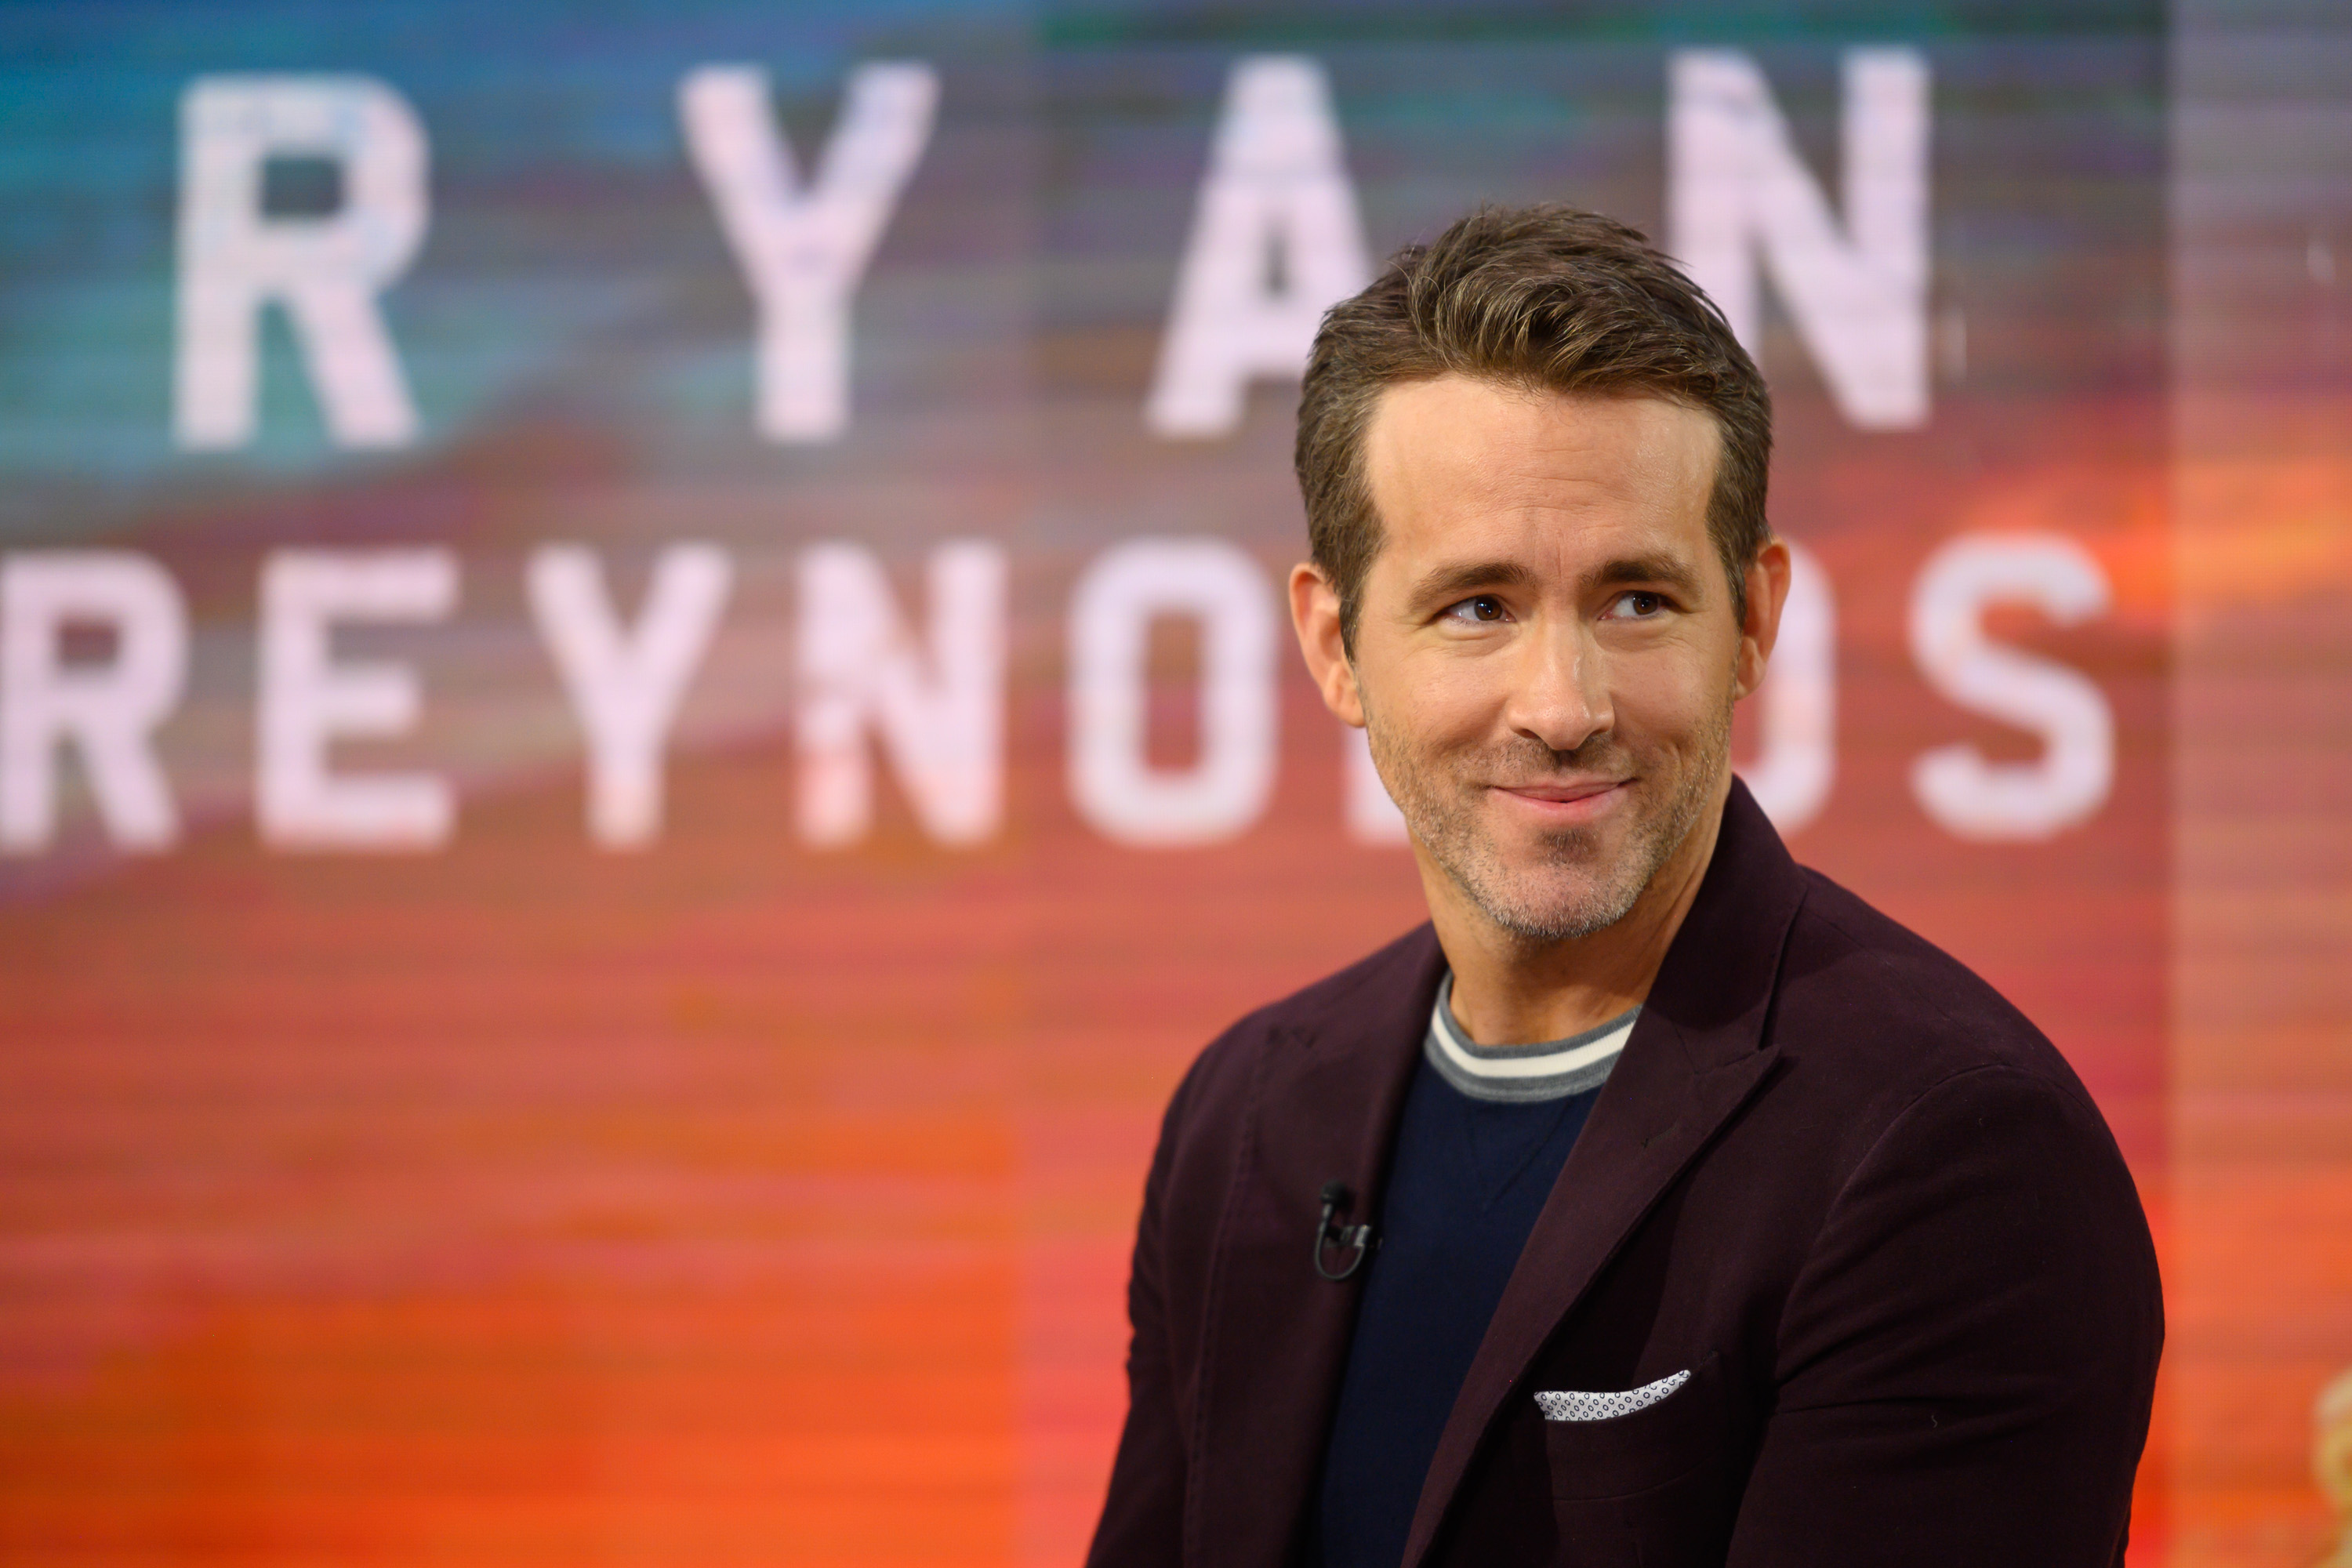 Ryan Reynolds during an appearance on the Today show